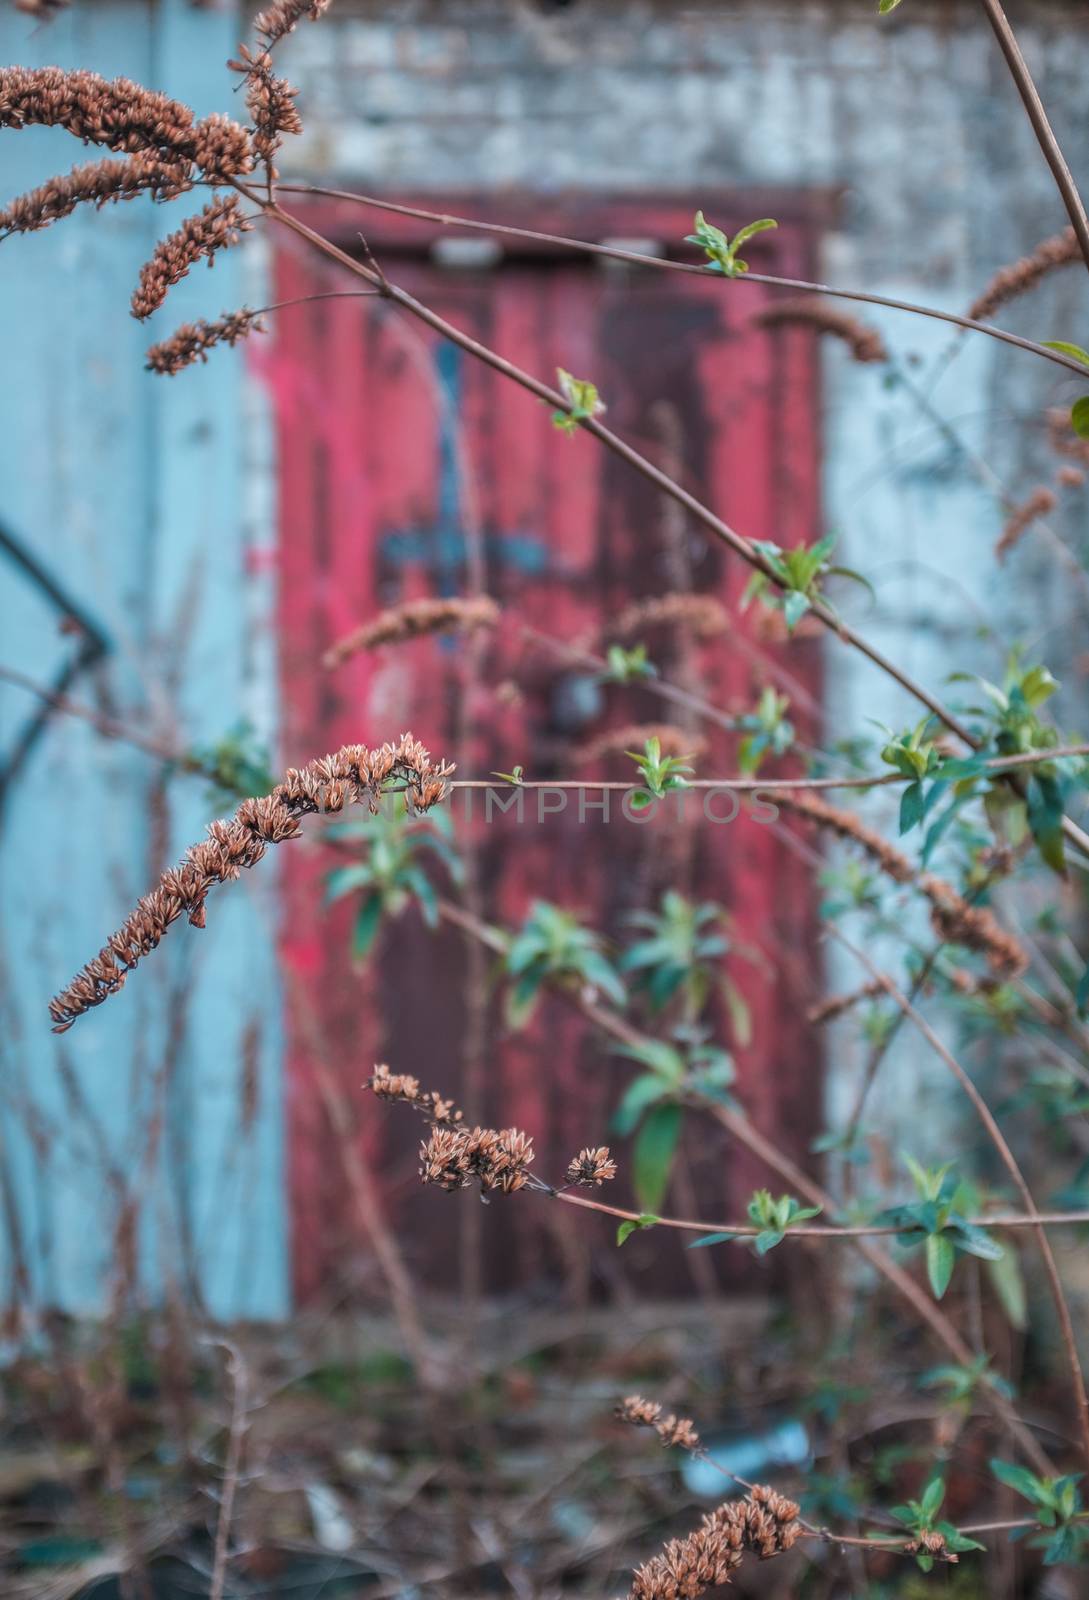 Urban Blight Image Of Plants Growing Outside An Old Derelict Building